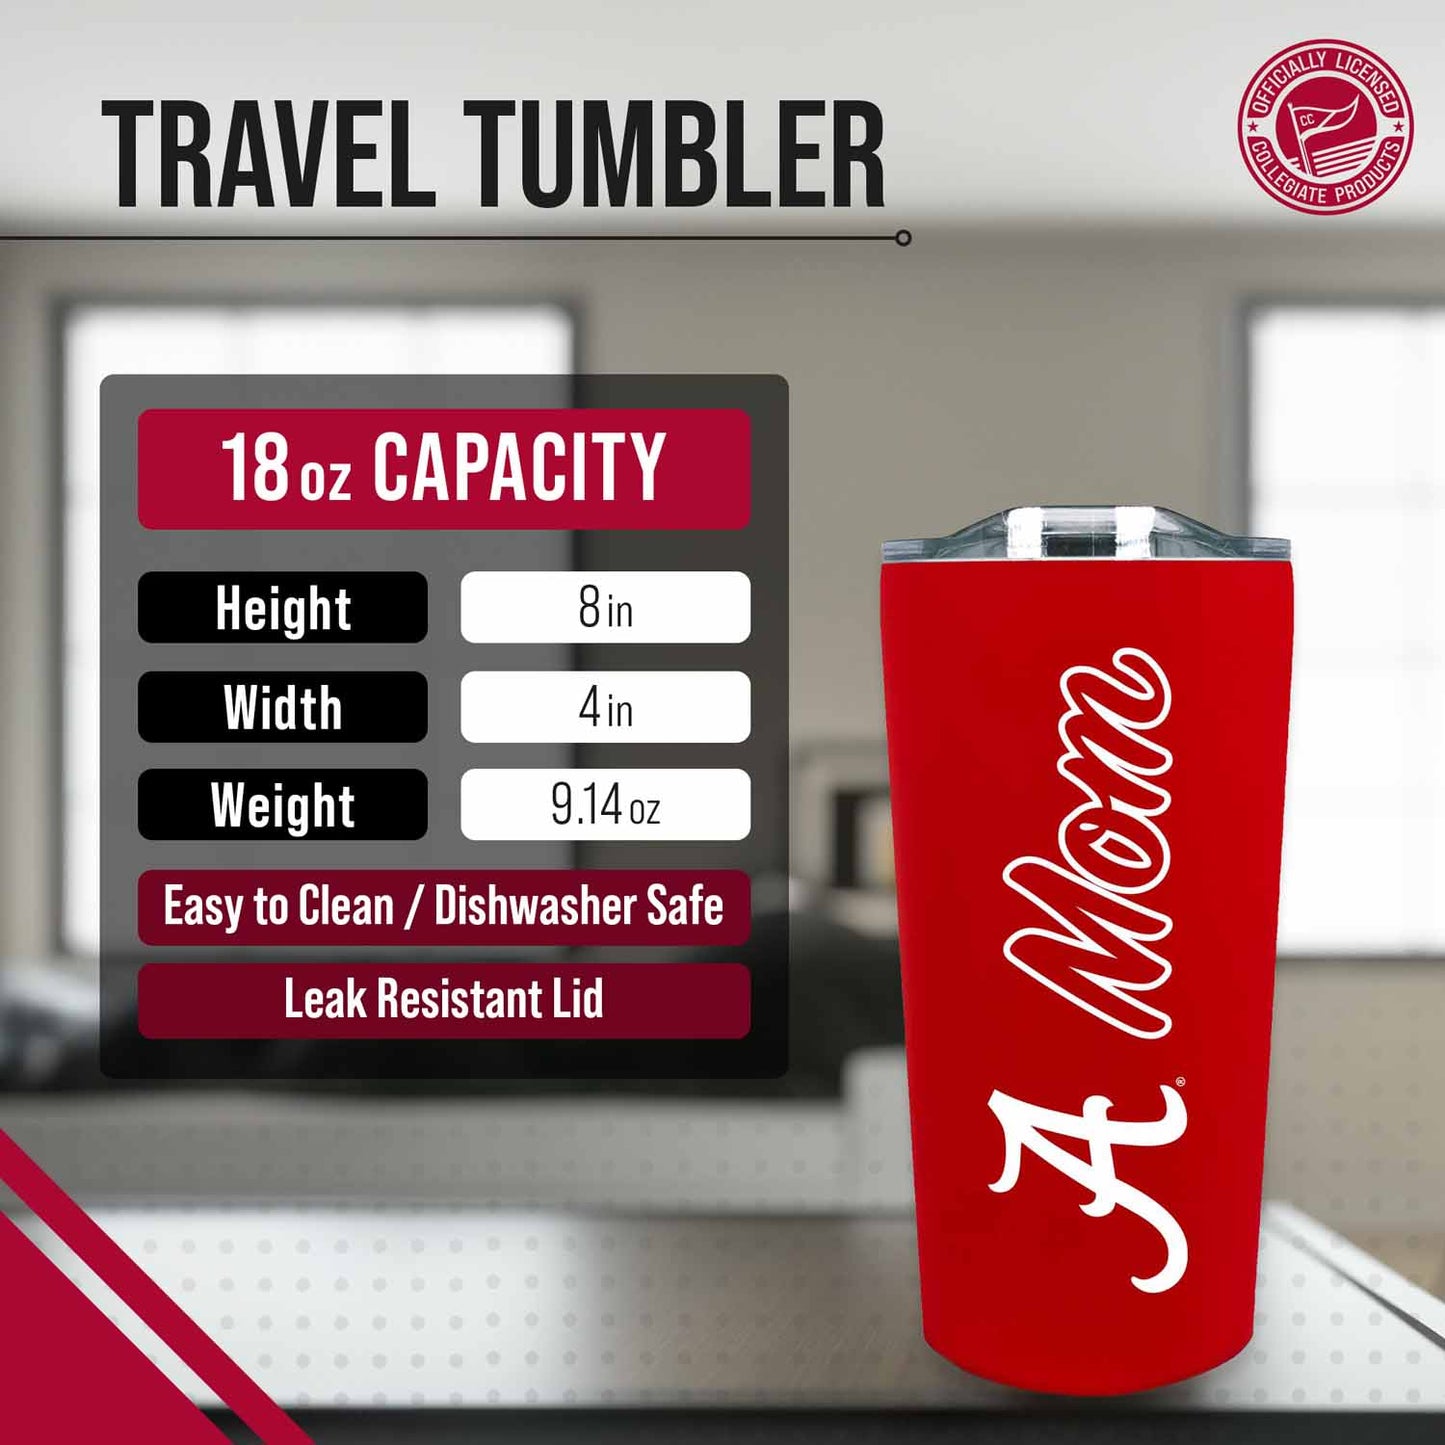 Texas A&M Aggies NCAA Stainless Steel Travel Tumbler for Mom - Maroon